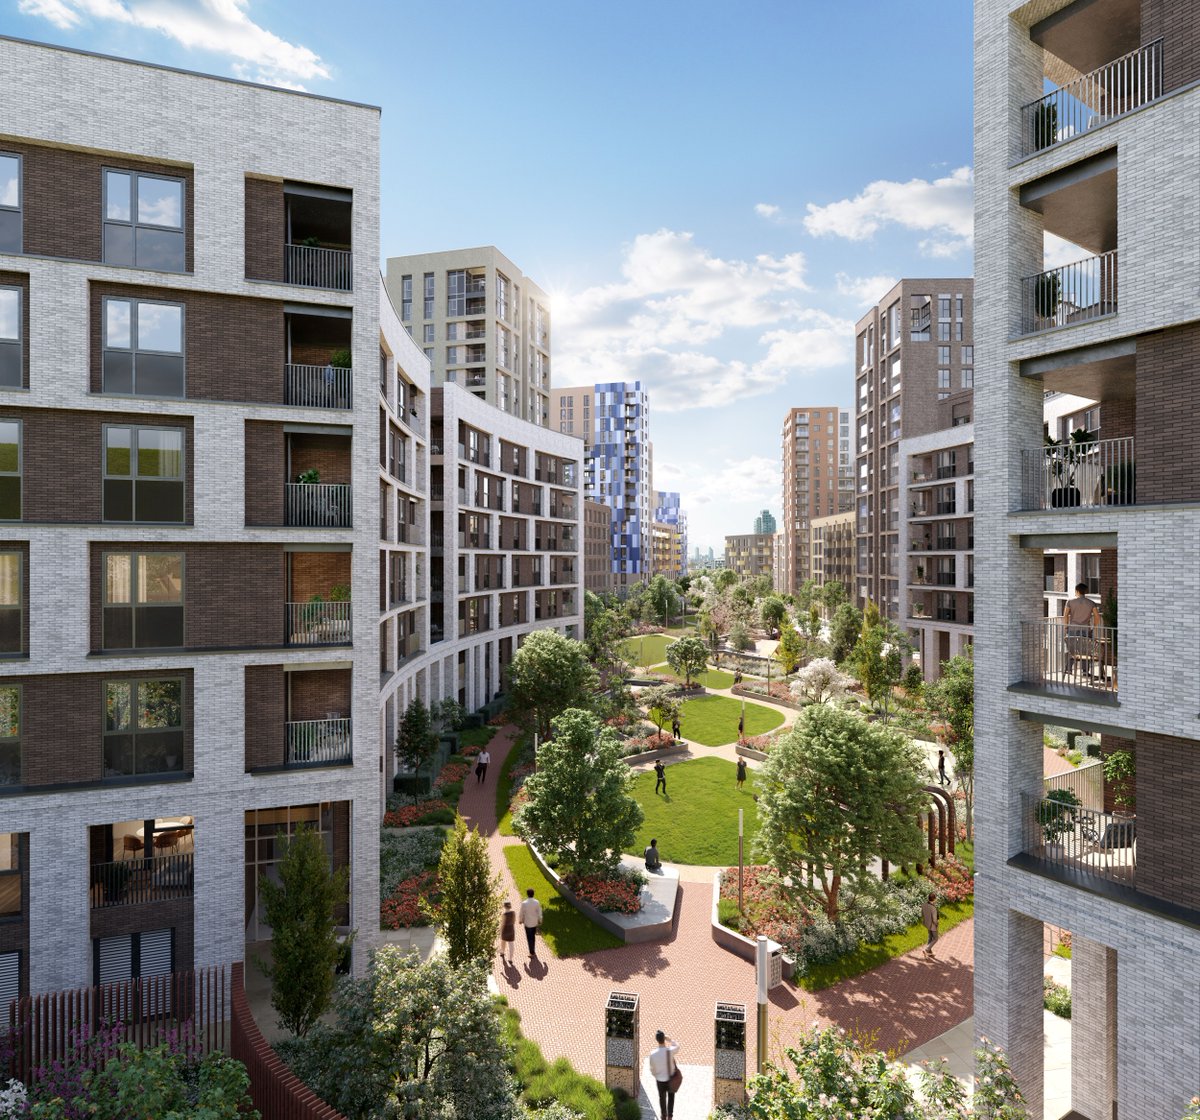 Don't miss your chance to own a piece of the vibrant Arden community! 🏙️ With over 80% of homes sold, these stylish 1 & 2-bedroom apartments are going fast. Deposits as low as £5,219, await you. Register your interest today! ow.ly/C0uG50Rllax